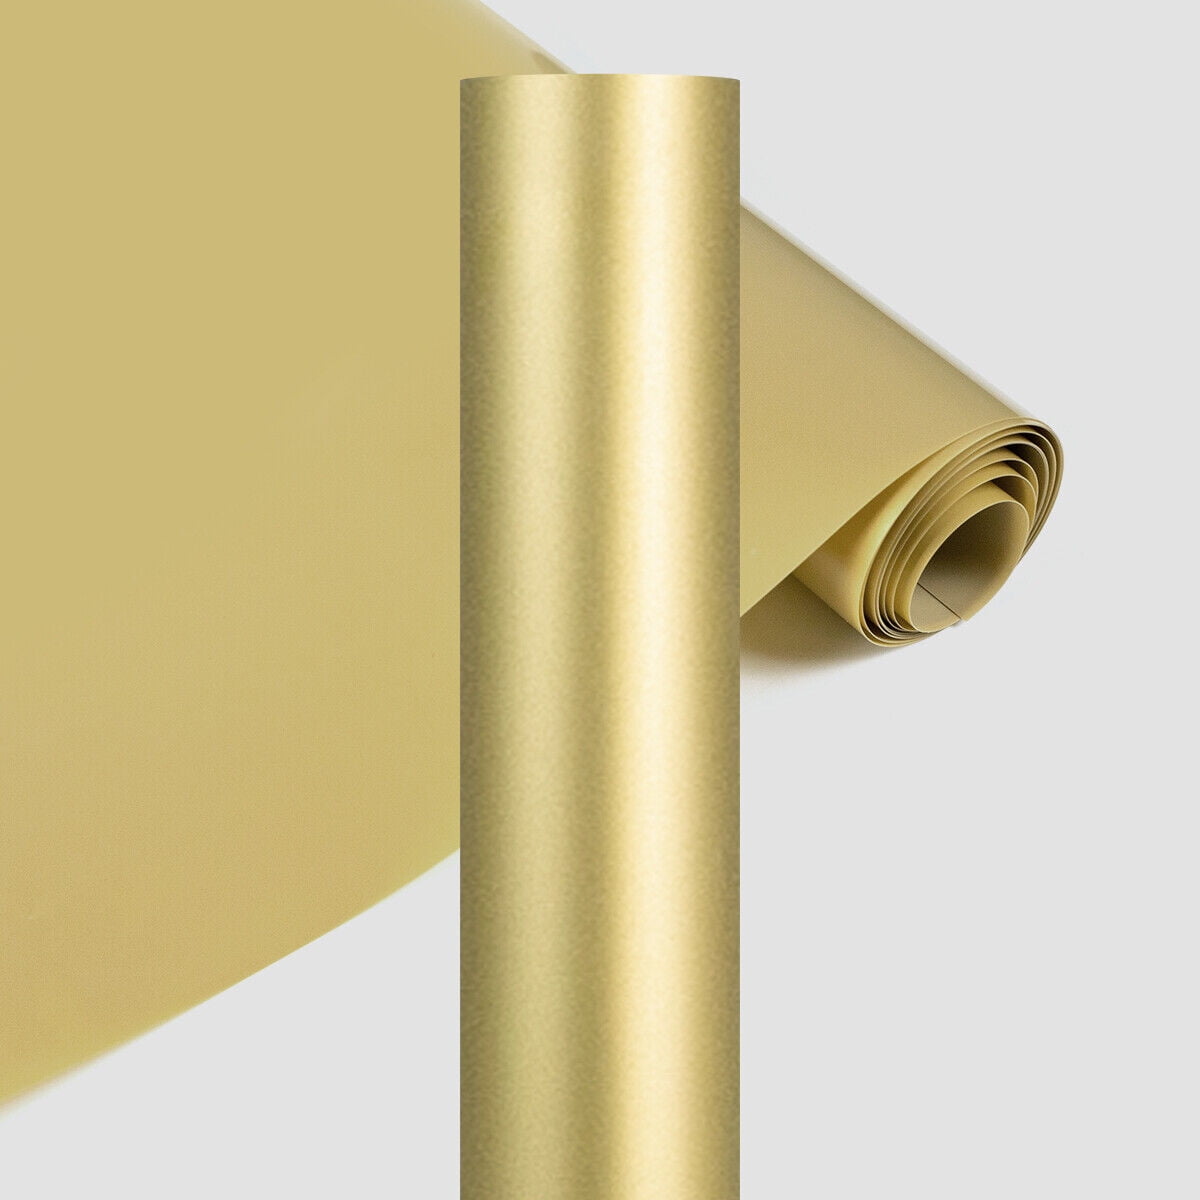 guangyintong HTV Heat Transfer Vinyl Rolls 12 x 12ft - PU Gold Iron on  Vinyl Easy to Cut &Weed, Glossy Surface (Gold B7)